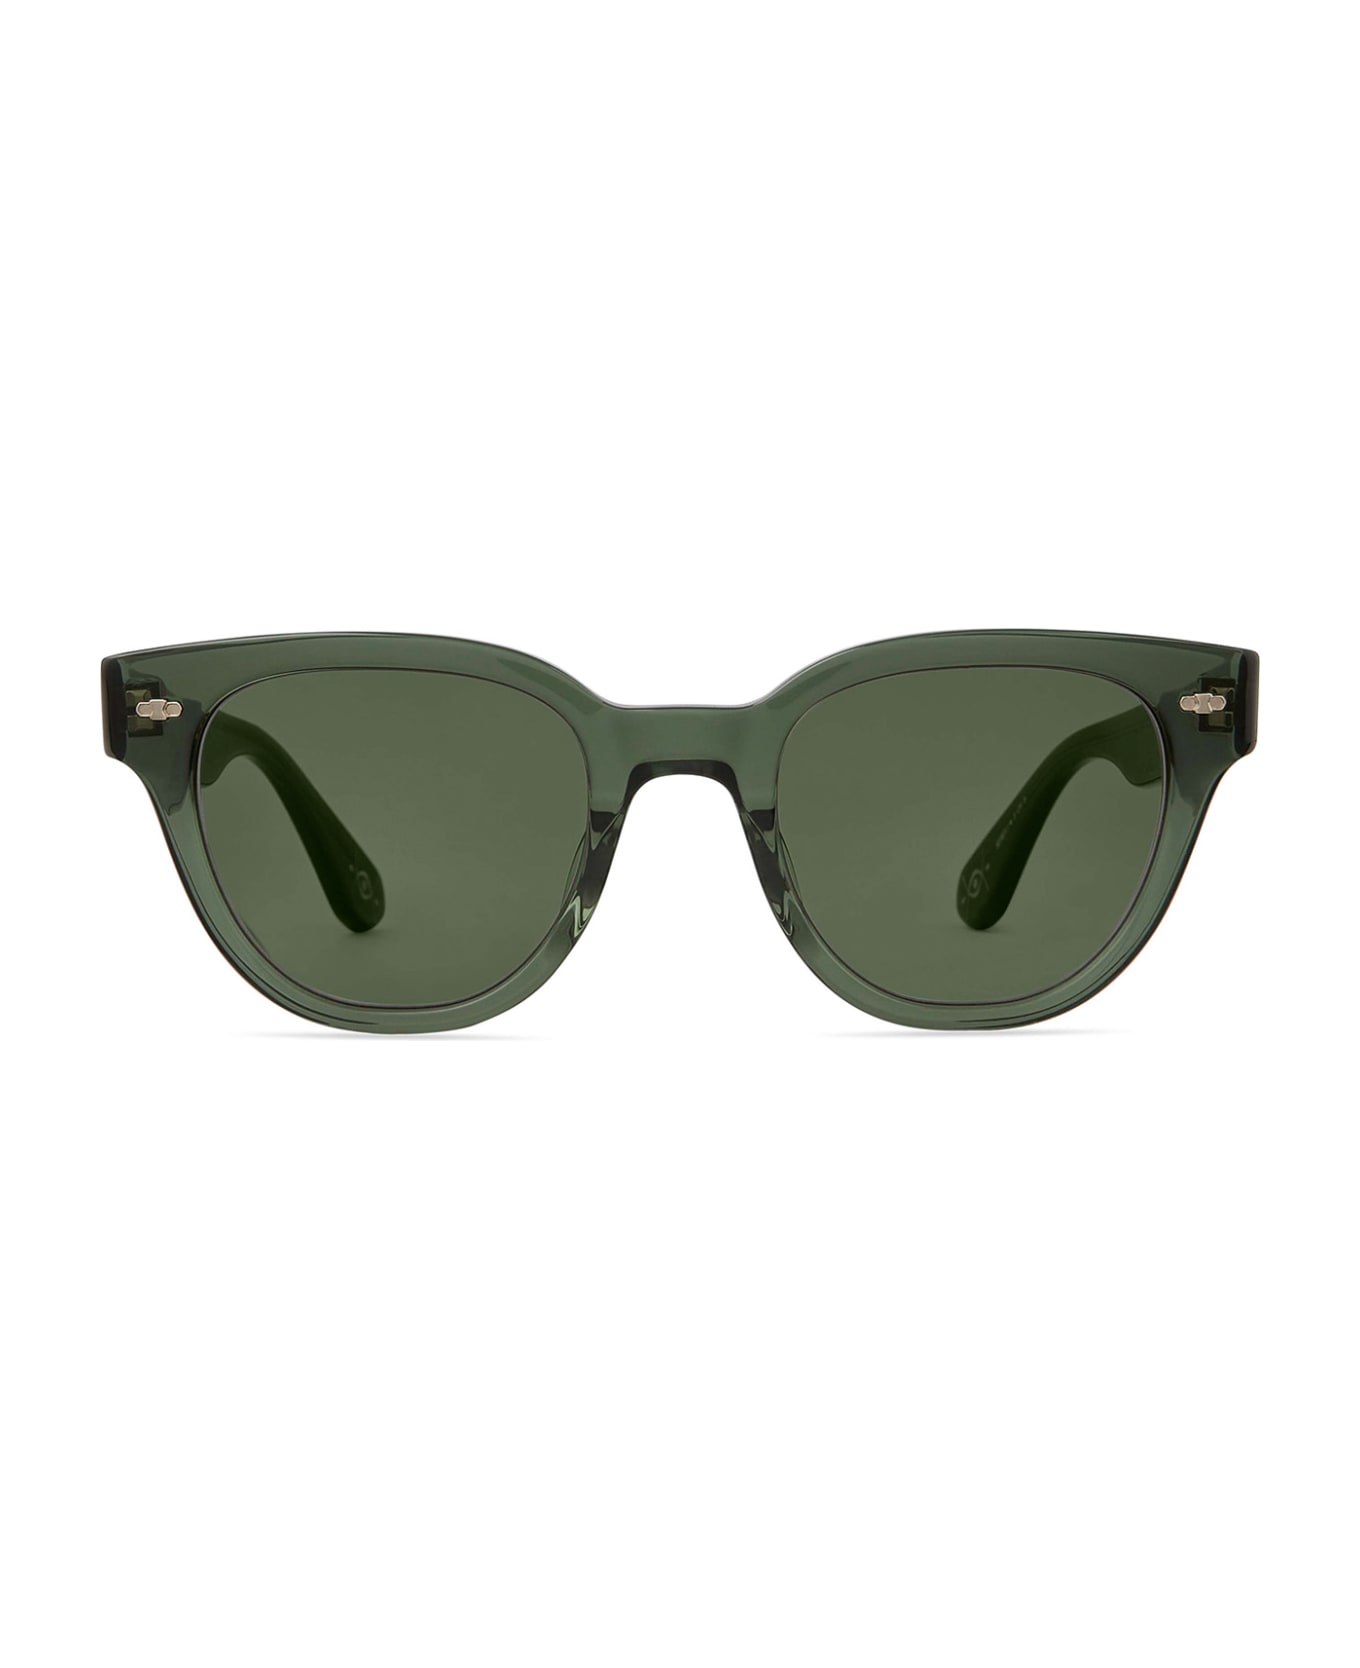 Mr. Leight Jane S Forest Glow-white Gold/g15 Sunglasses - Forest Glow-White Gold/G15